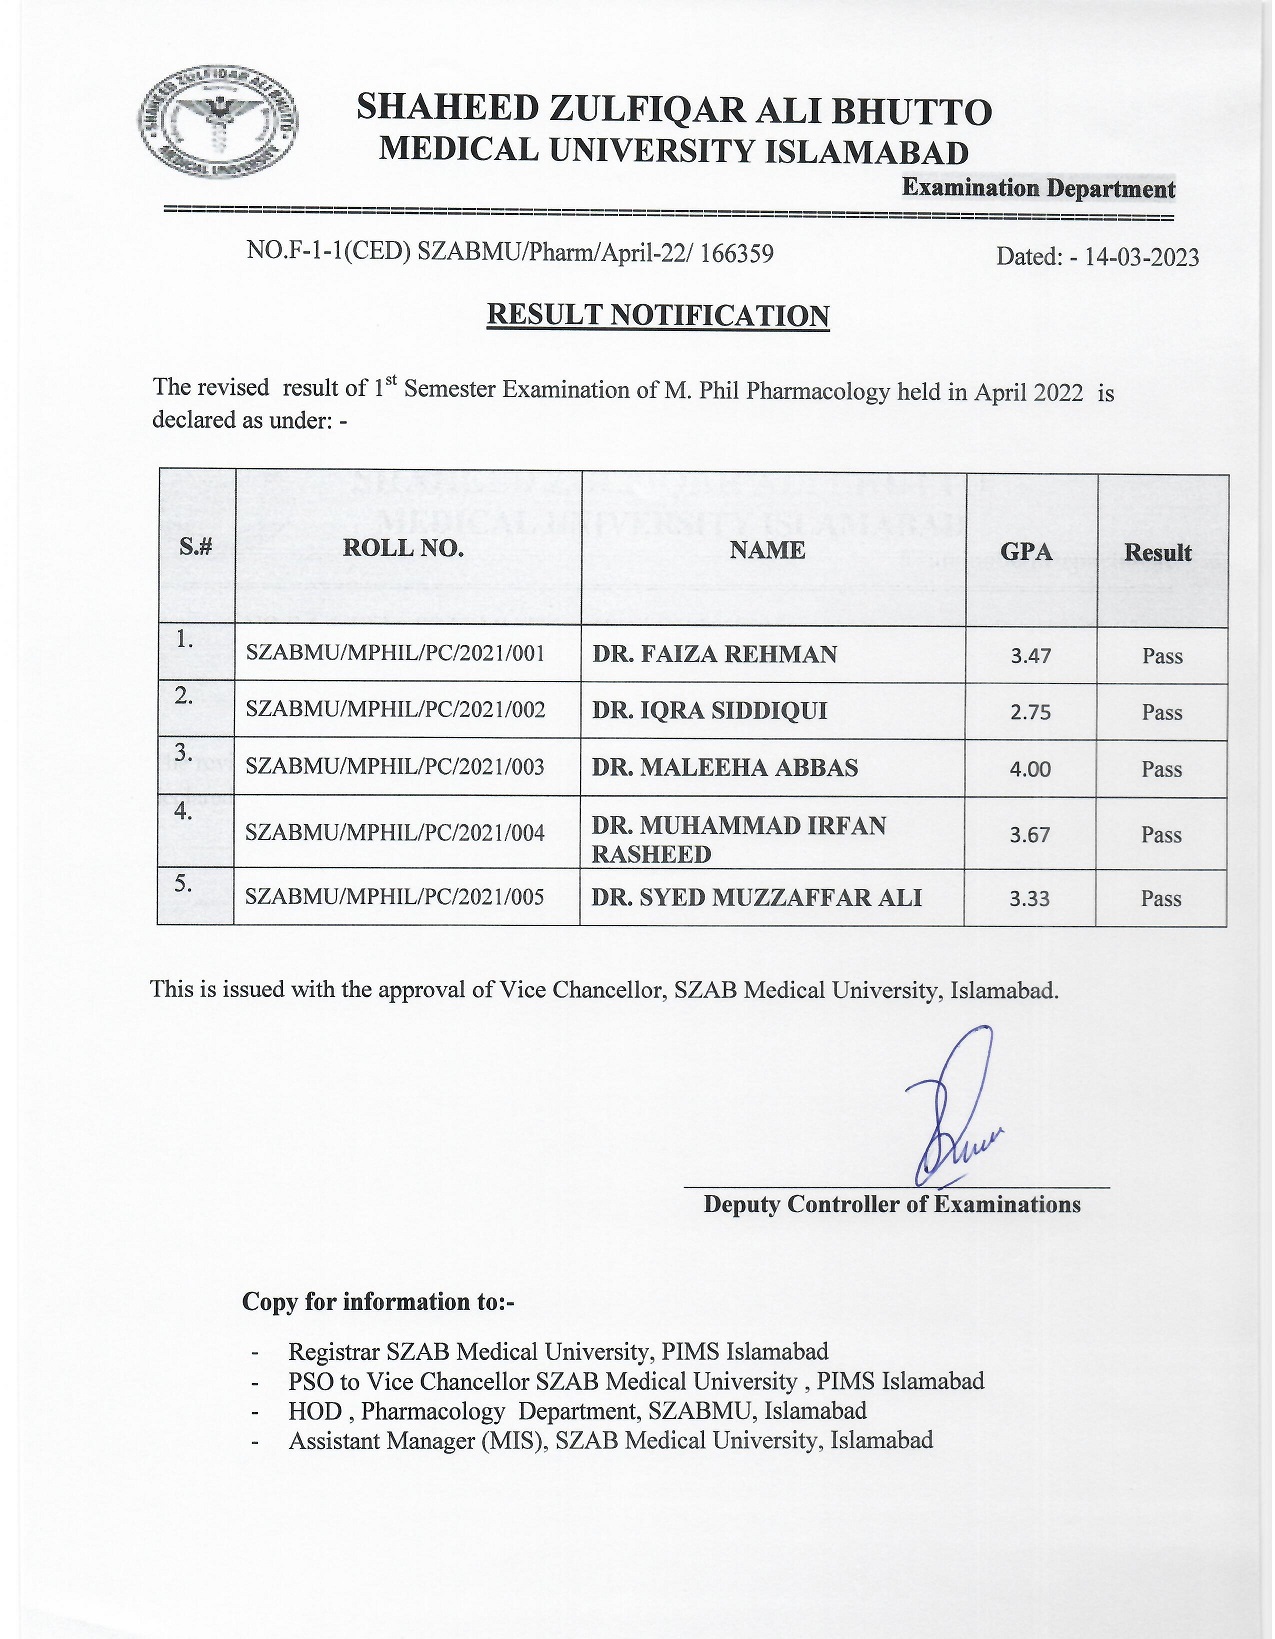 Revised Result Notification - 1st Semester M.Phil. Pharmacology held in April 2022